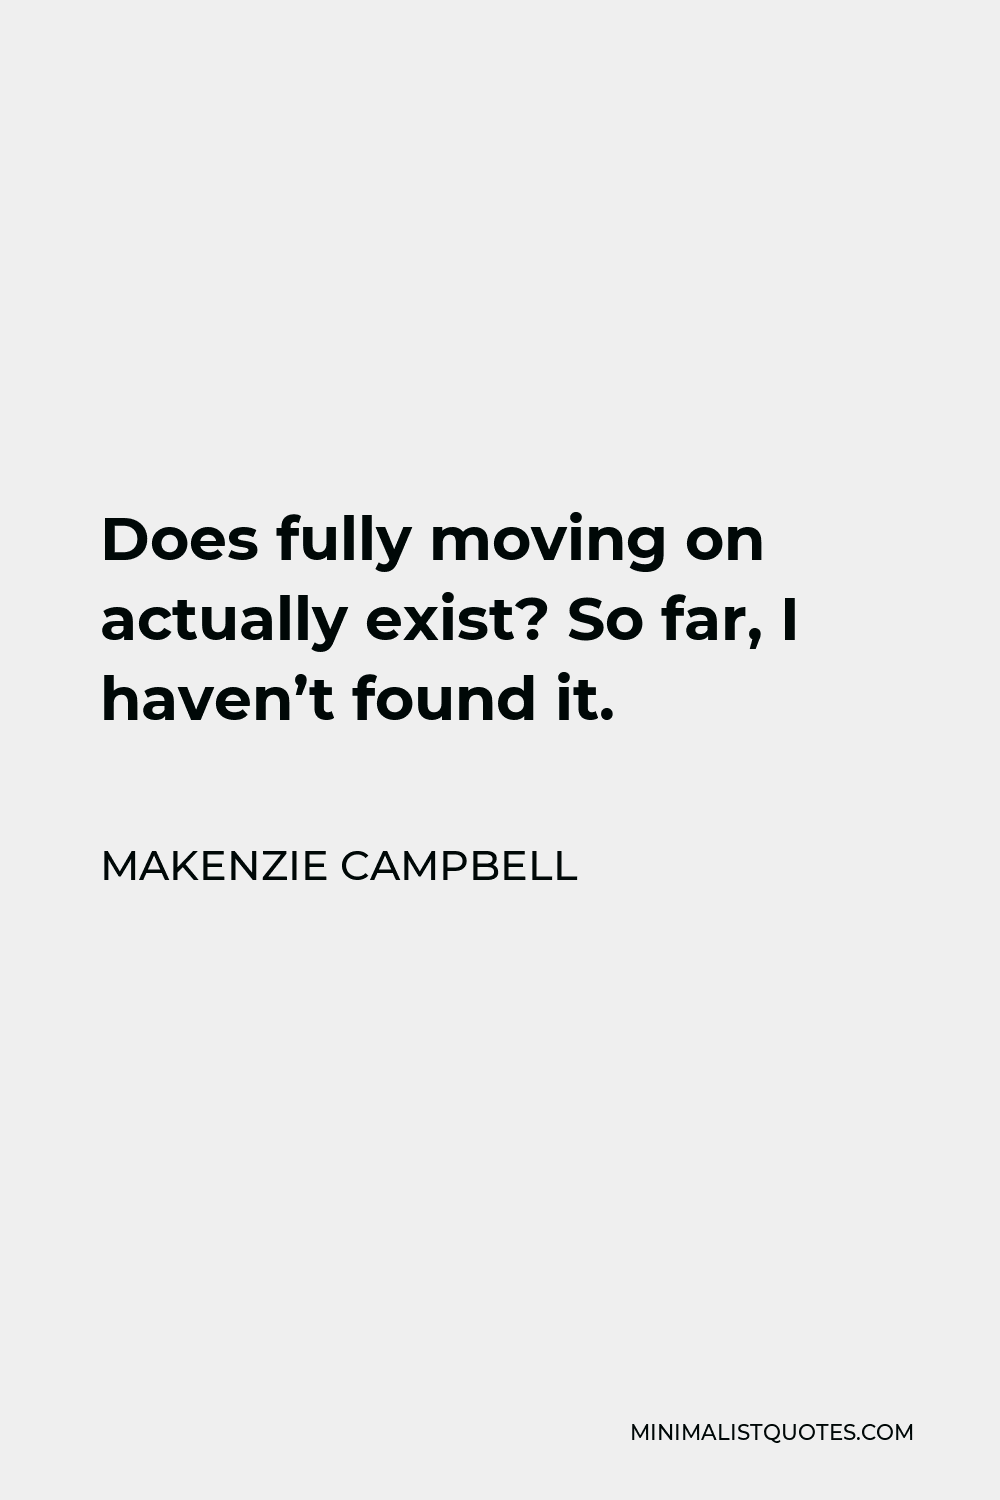 Makenzie Campbell Quote - Does fully moving on actually exist? So far, I haven’t found it.